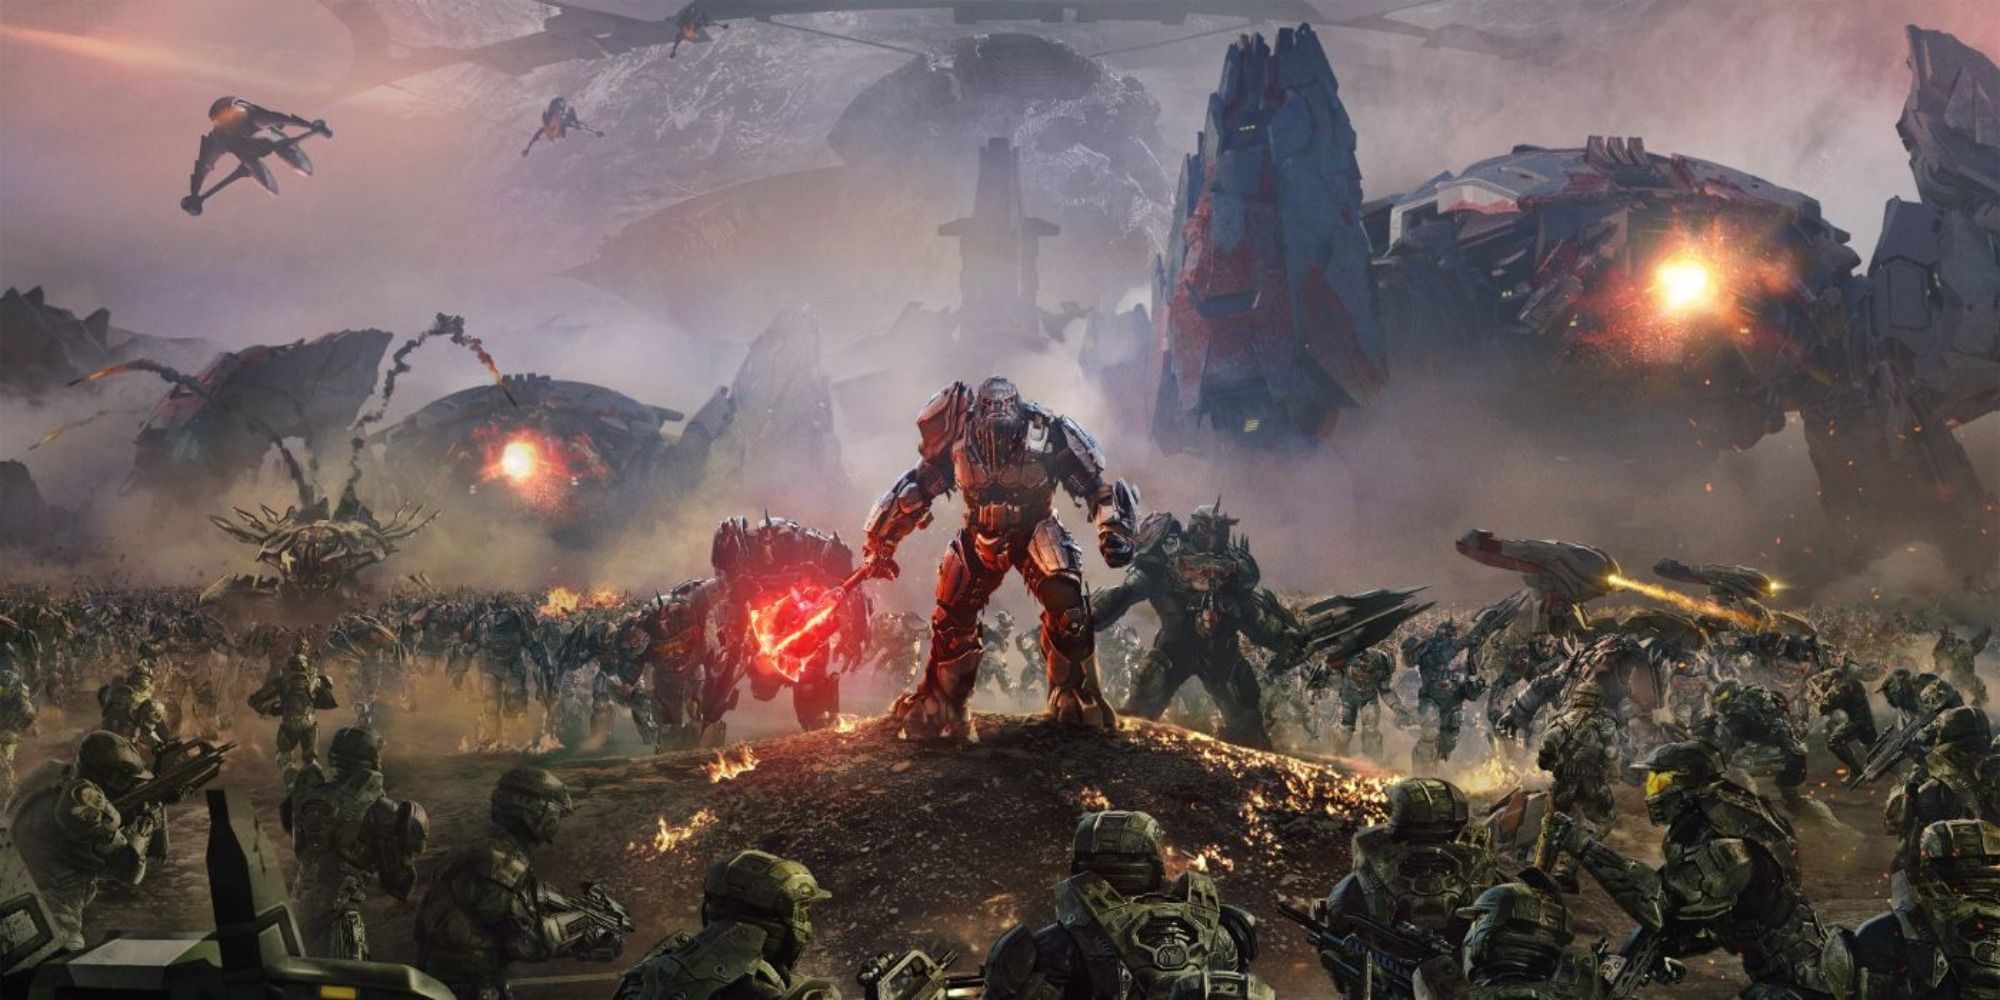 The Banished in Halo Wars 2